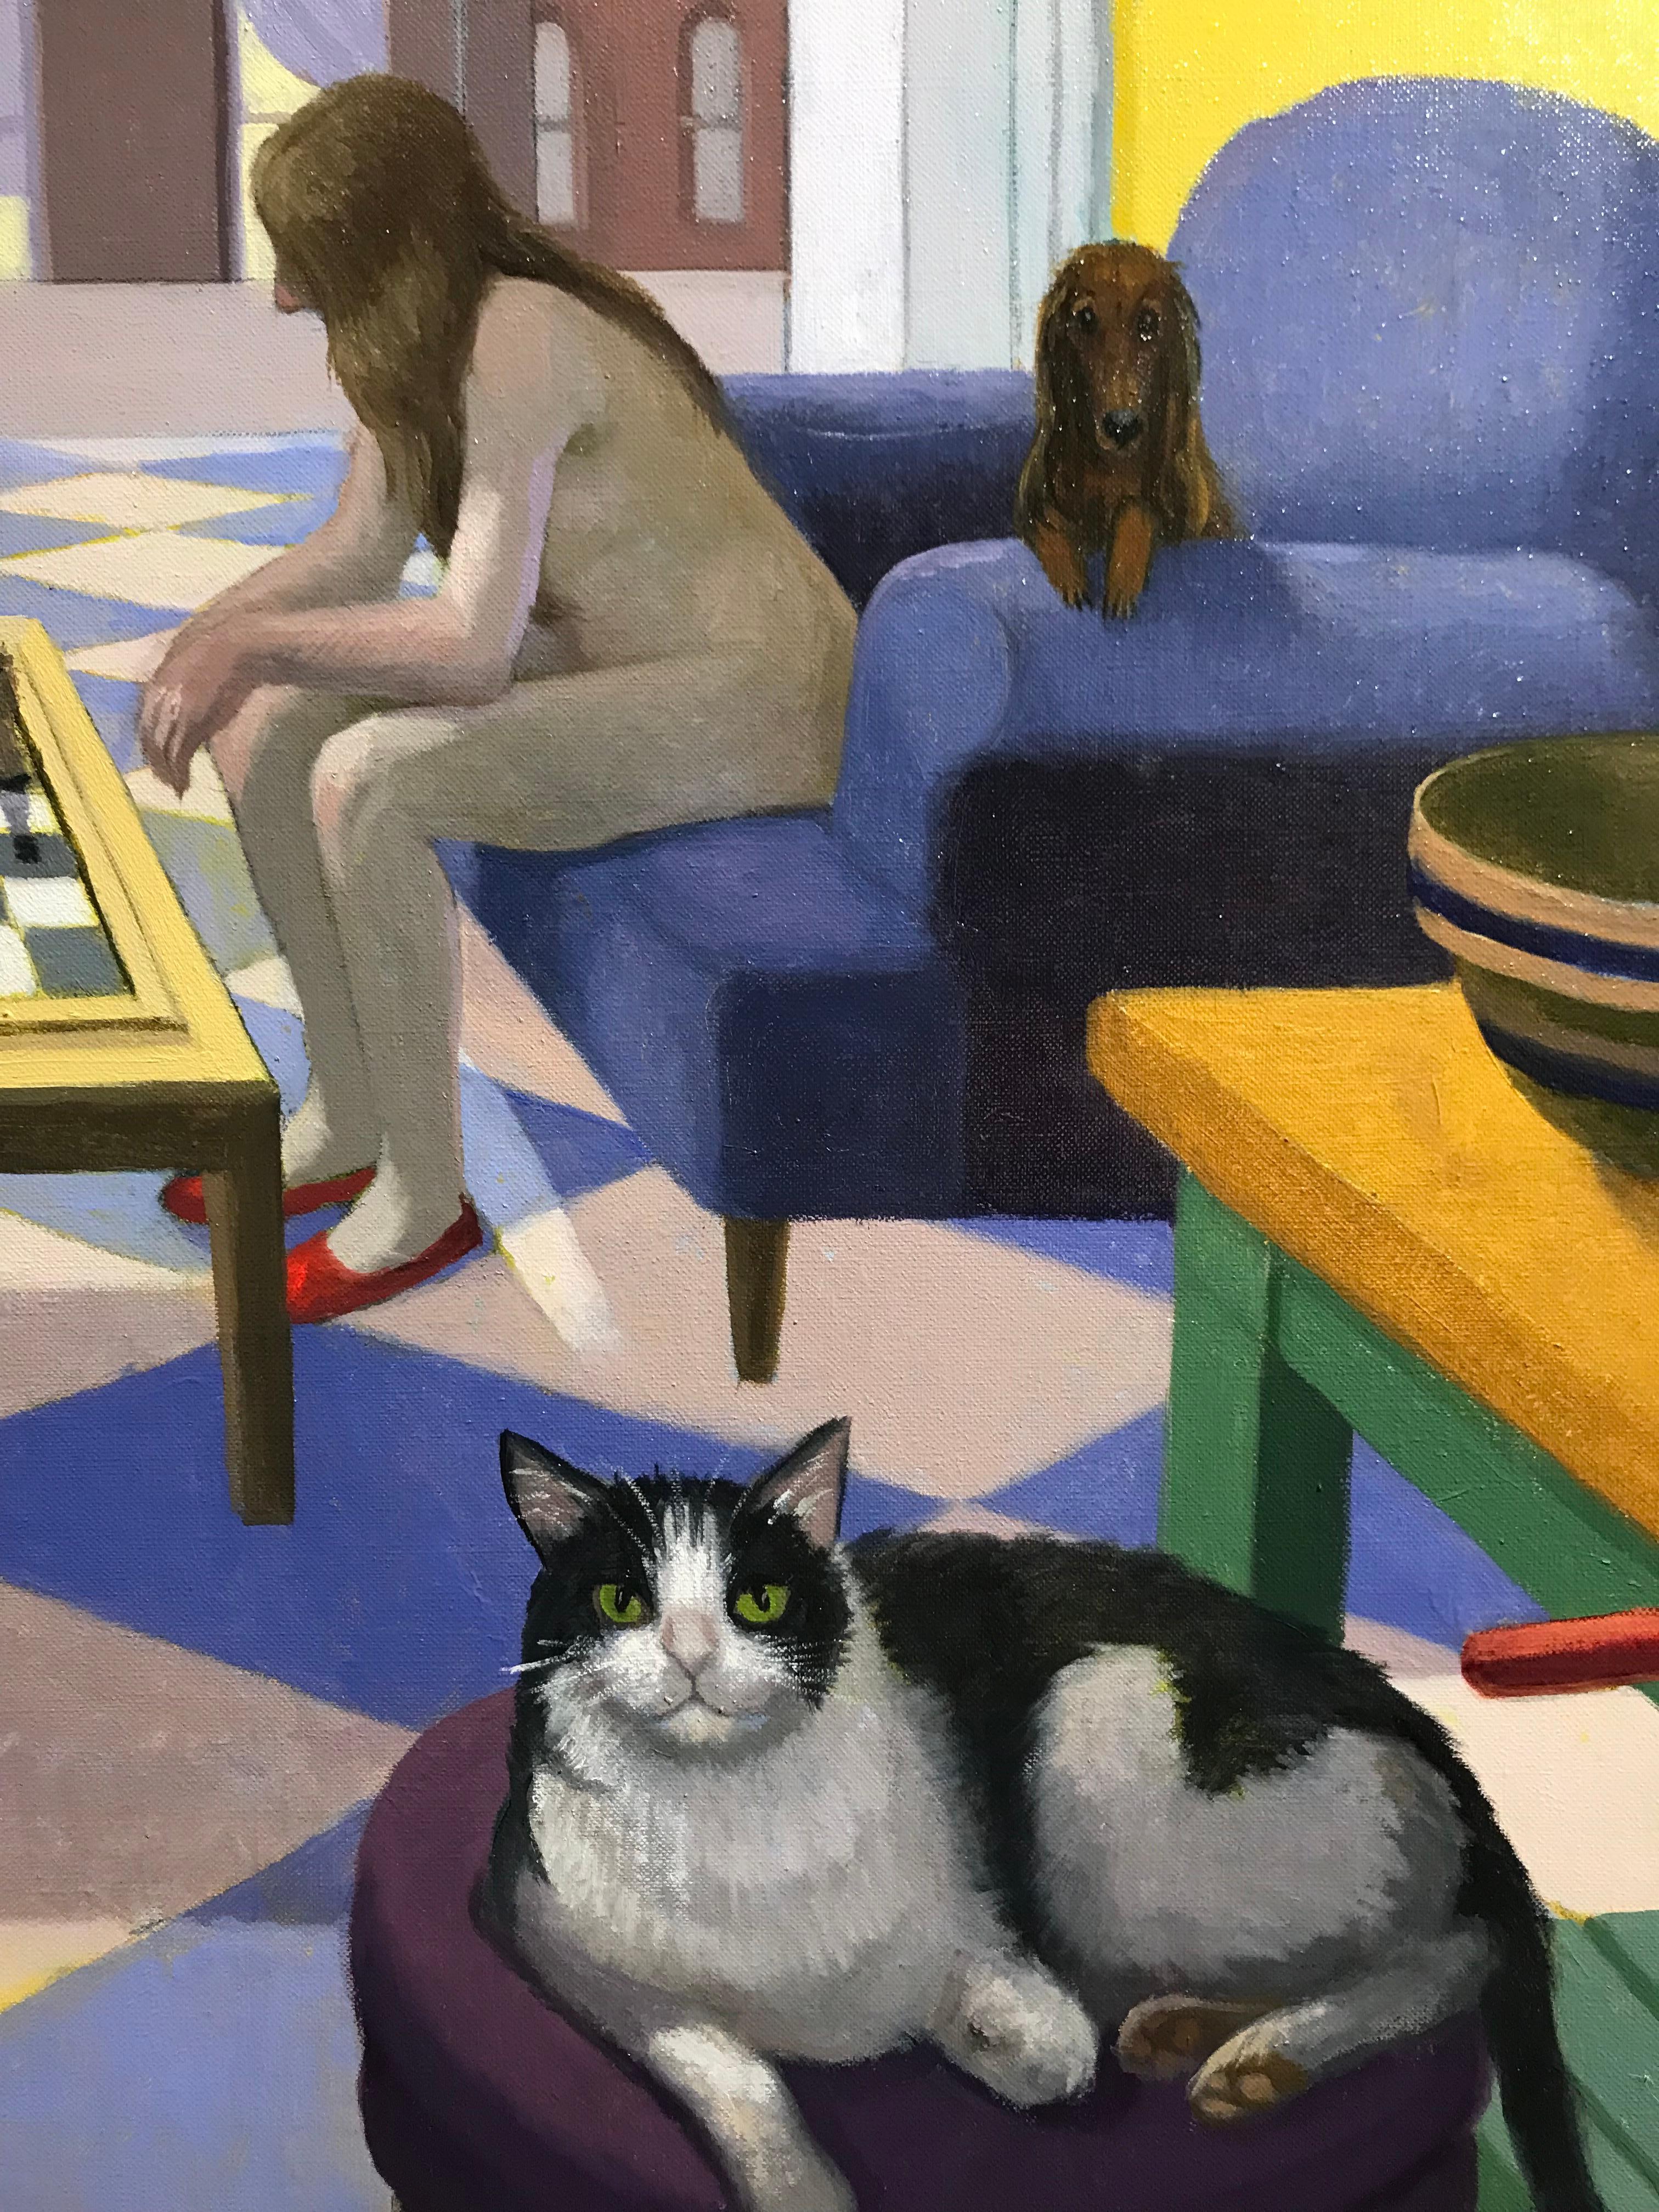 7 P.M. with Hopper and Bonnard 3